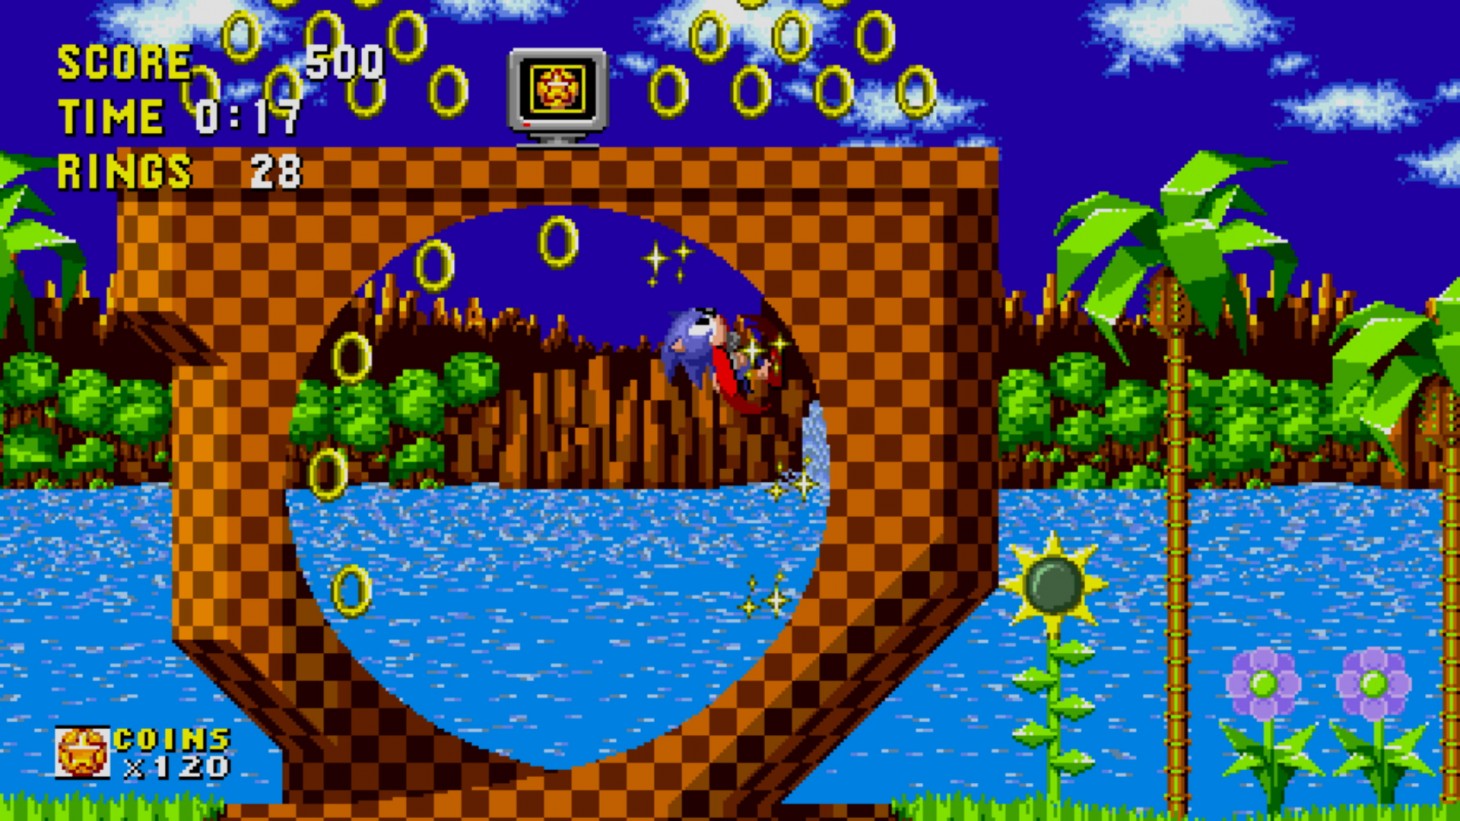 A compilation of the 90's 'Sonic' games will be released in June